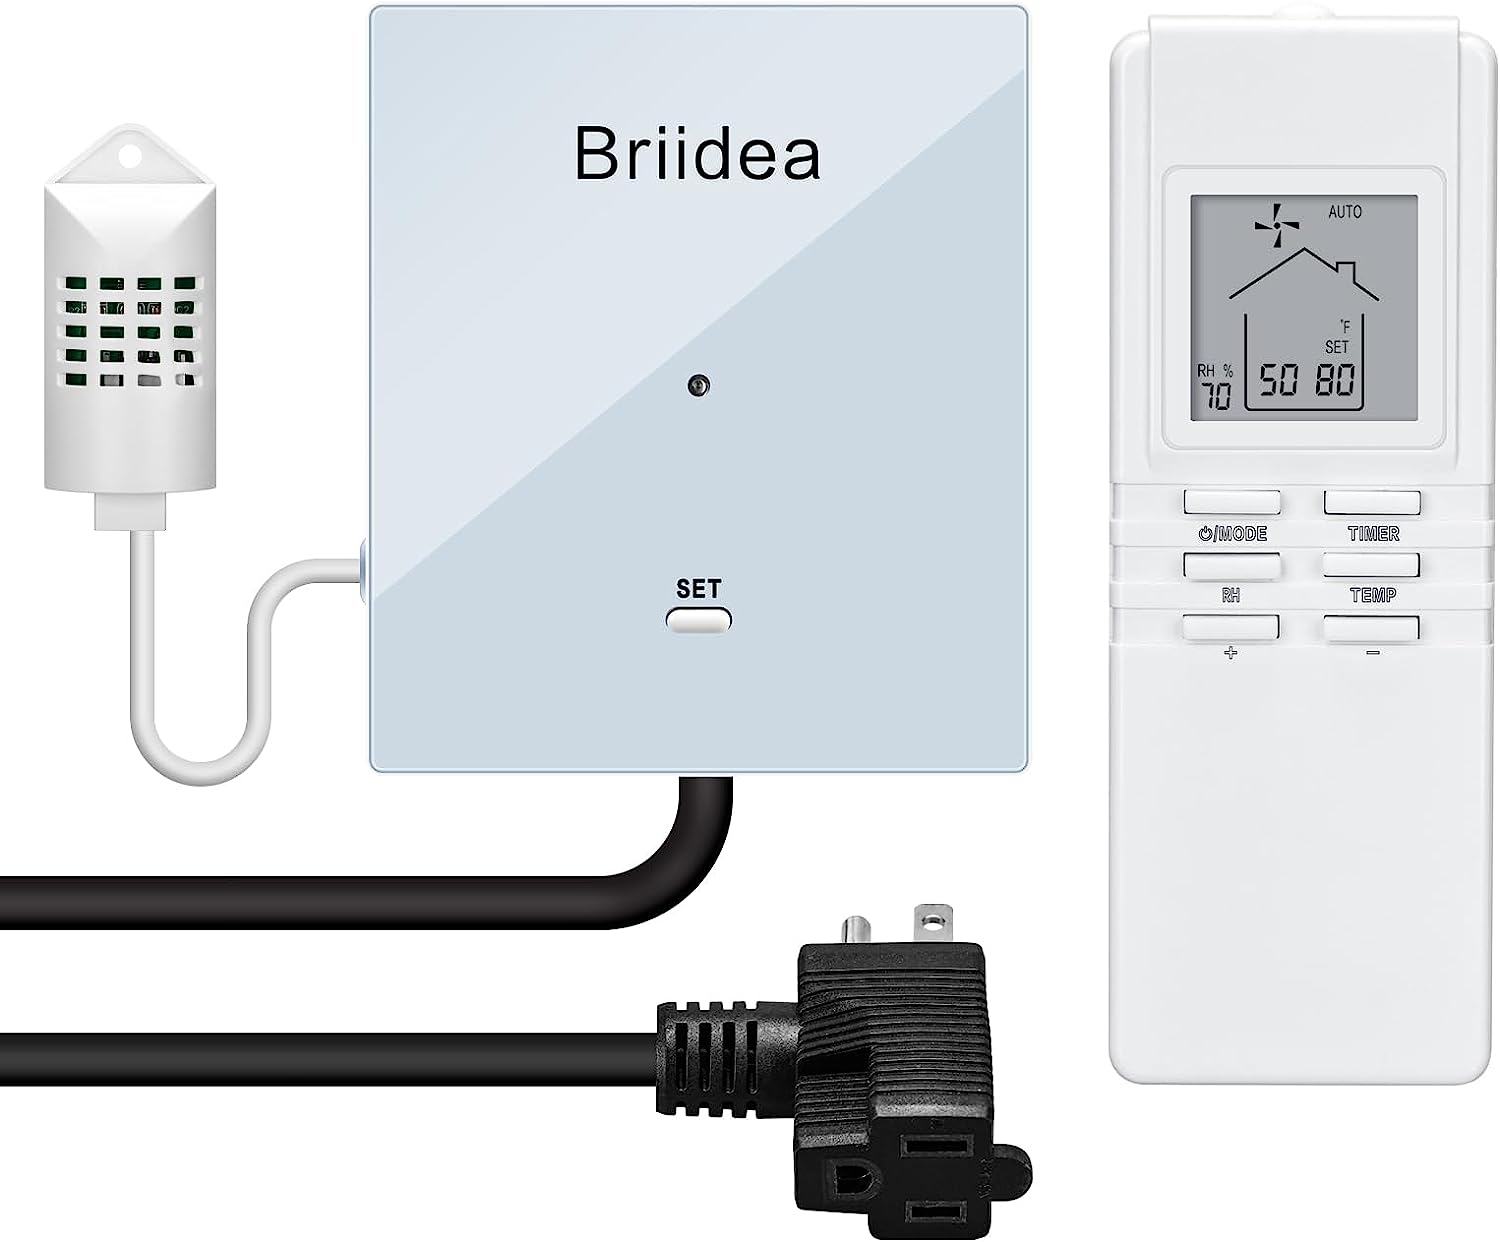 briidea Exhaust Fan Remote Control Kit, Attic Fan Thermostat Control Kit with Temperature & Humidity Sensor for Achieving a Cool and Dry Attic, Easily Convert Your Hardwired Fans to Smart Fans